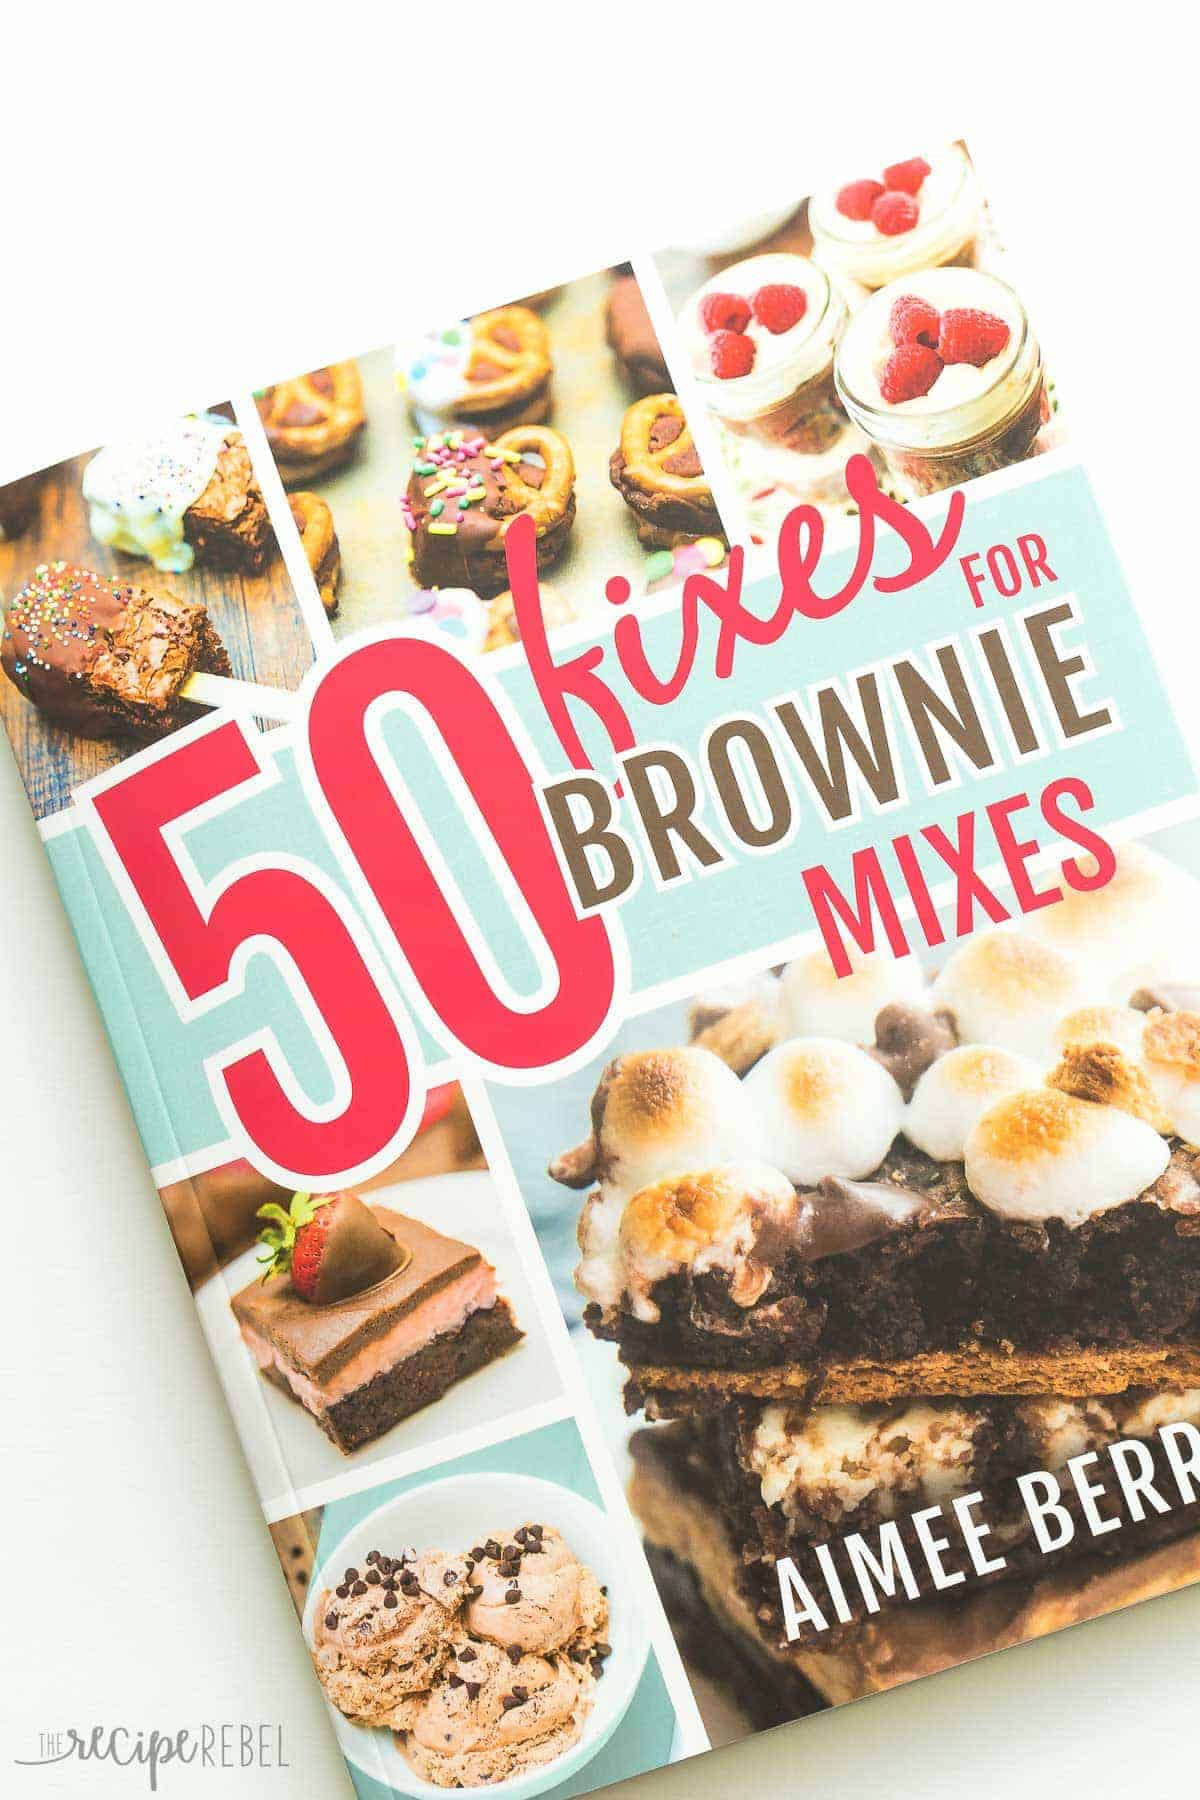 50 fixes for brownie mixes cookbook by Aimee Berrett